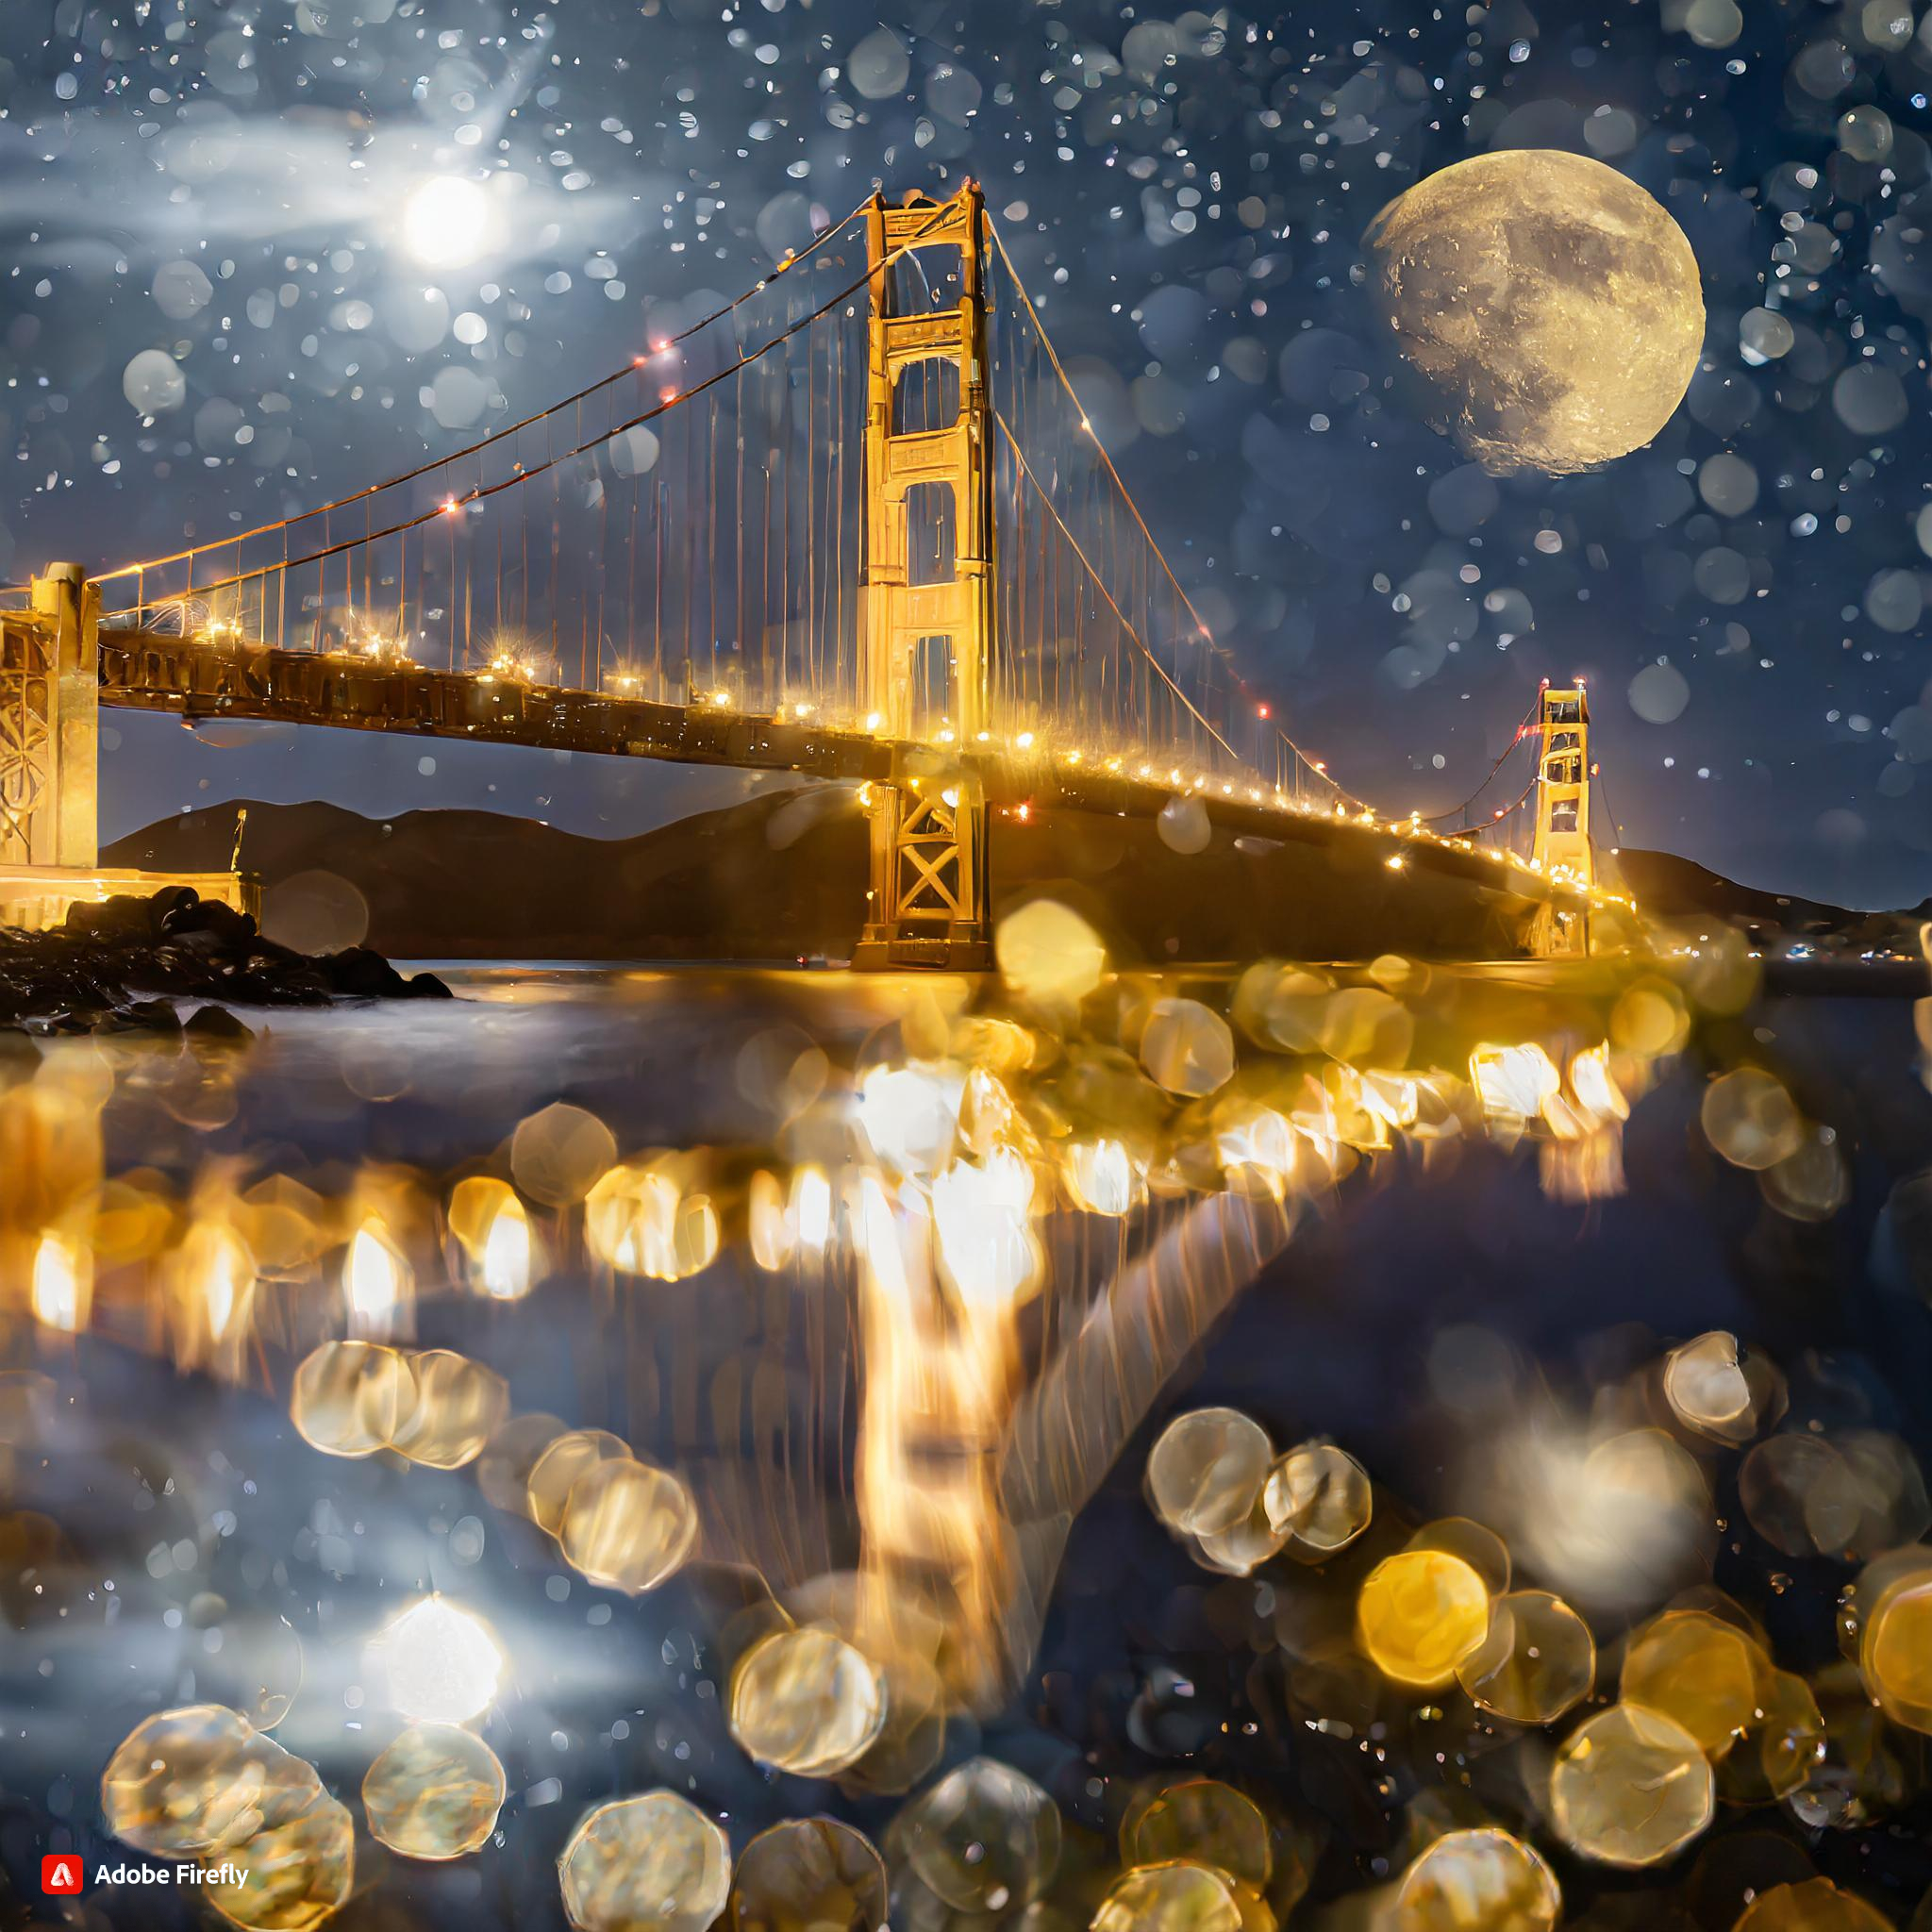  Firefly The golden gate bridge with the moon reflecting on the water at night